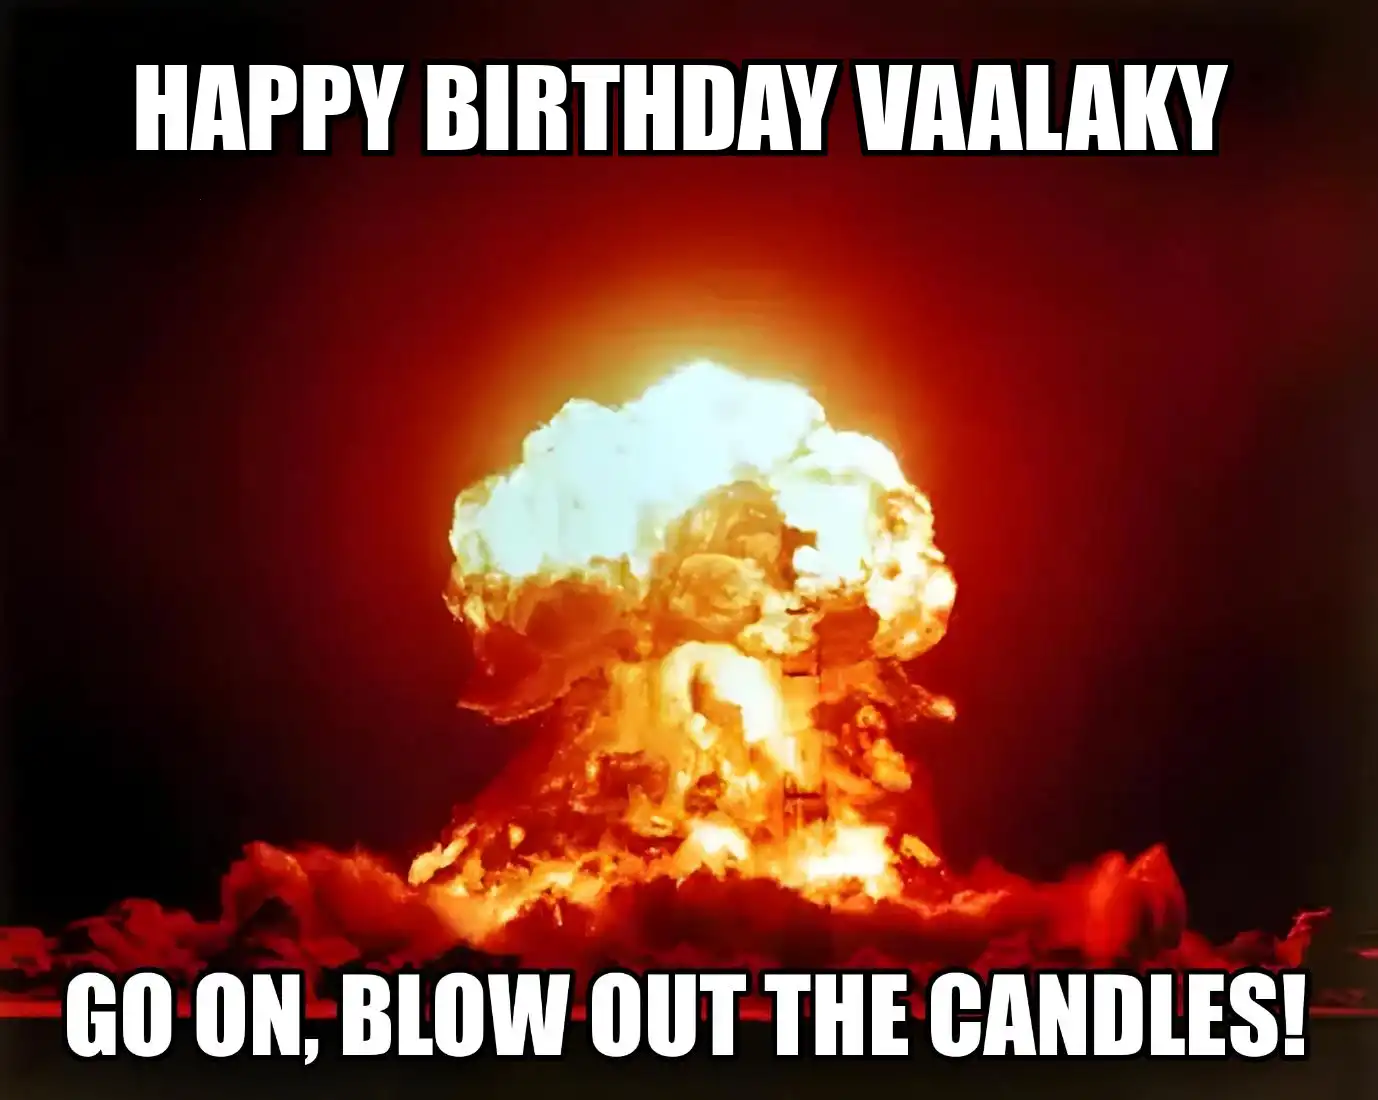 Happy Birthday Vaalaky Go On Blow Out The Candles Meme